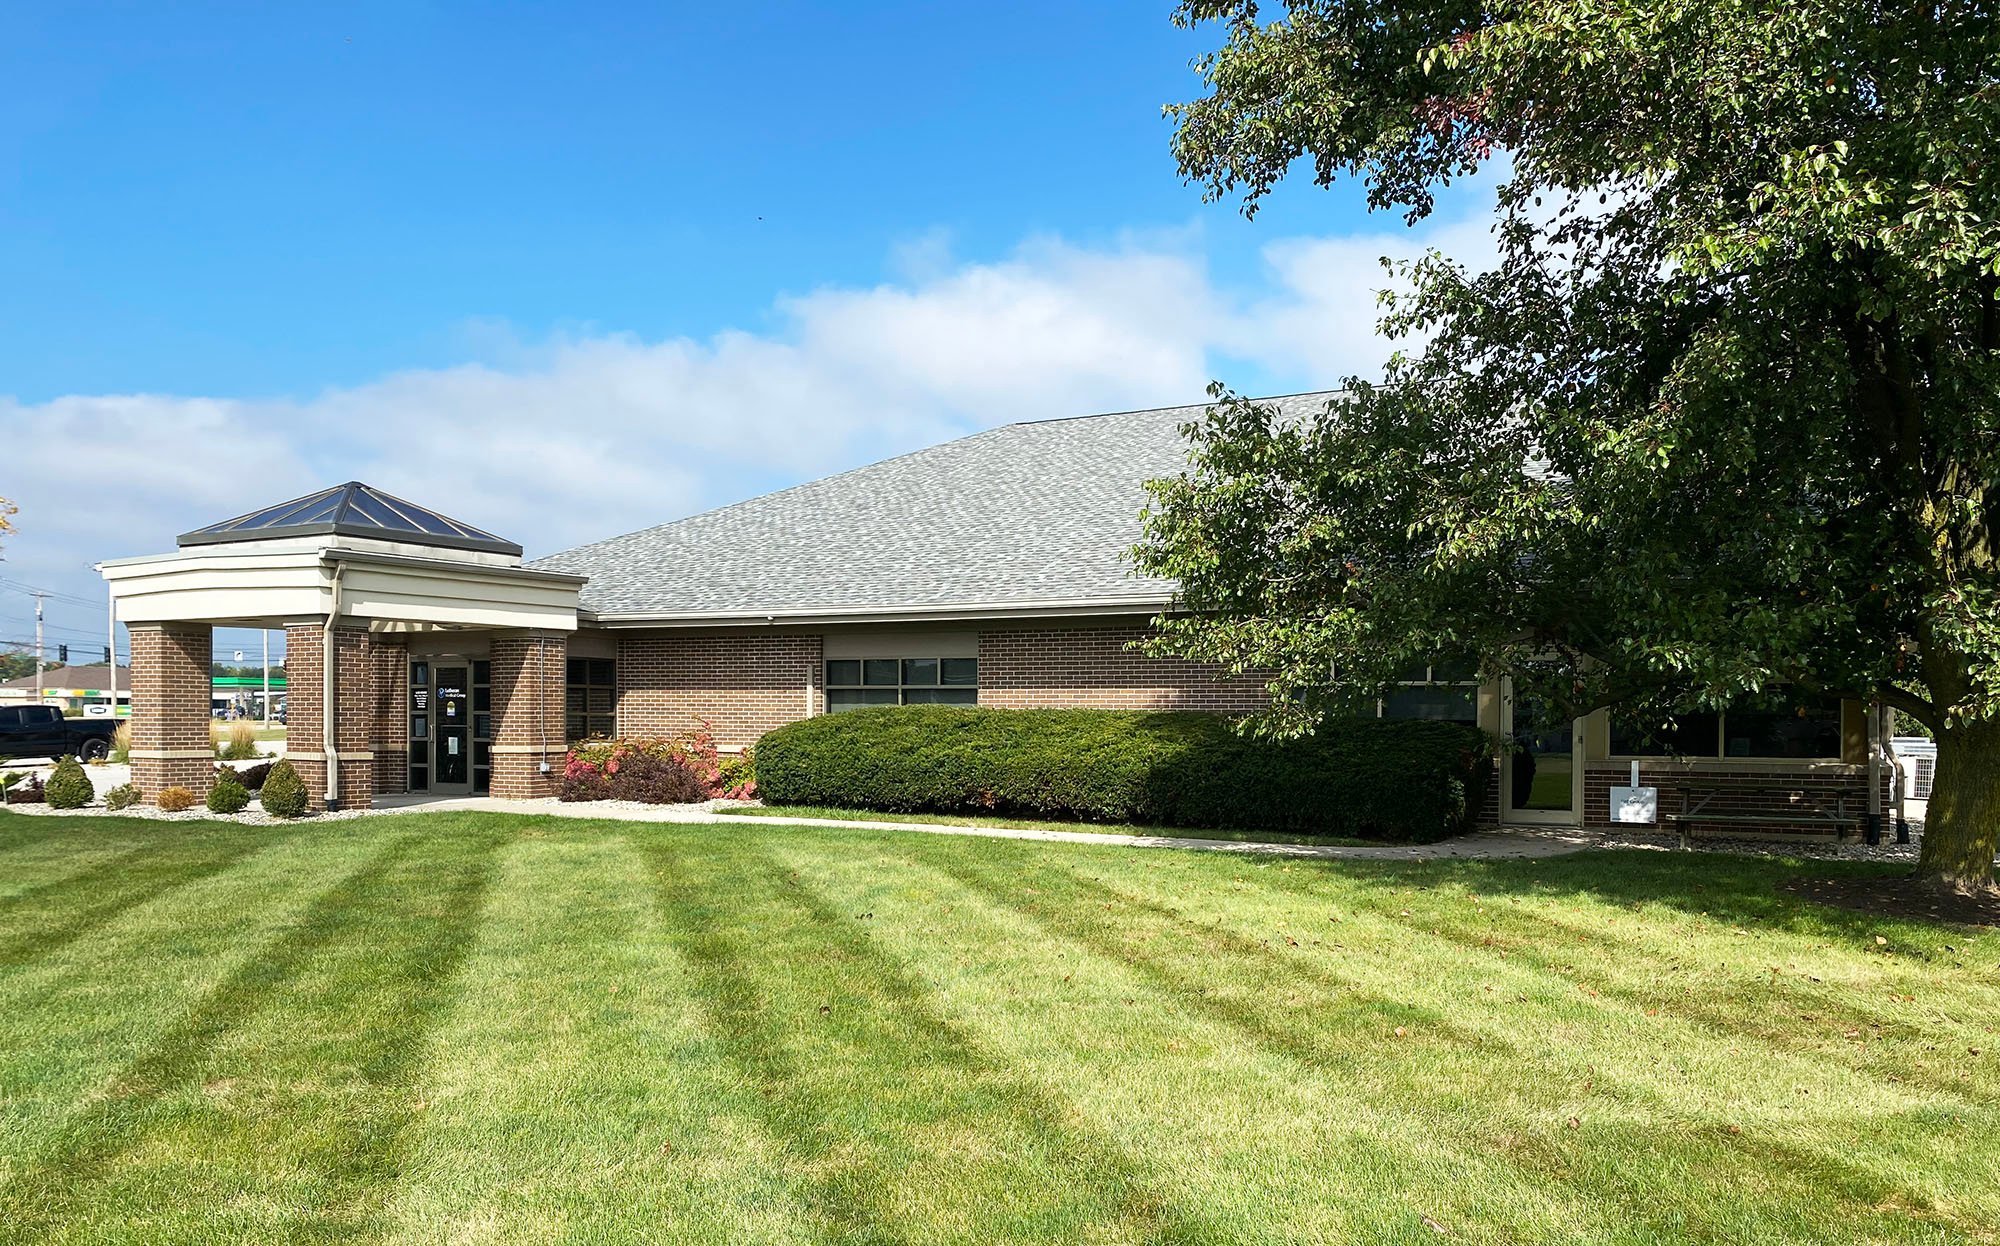 Sturges Property Group - Medical Office Space - 6404 Rothman Rd, Fort Wayne, IN 46835